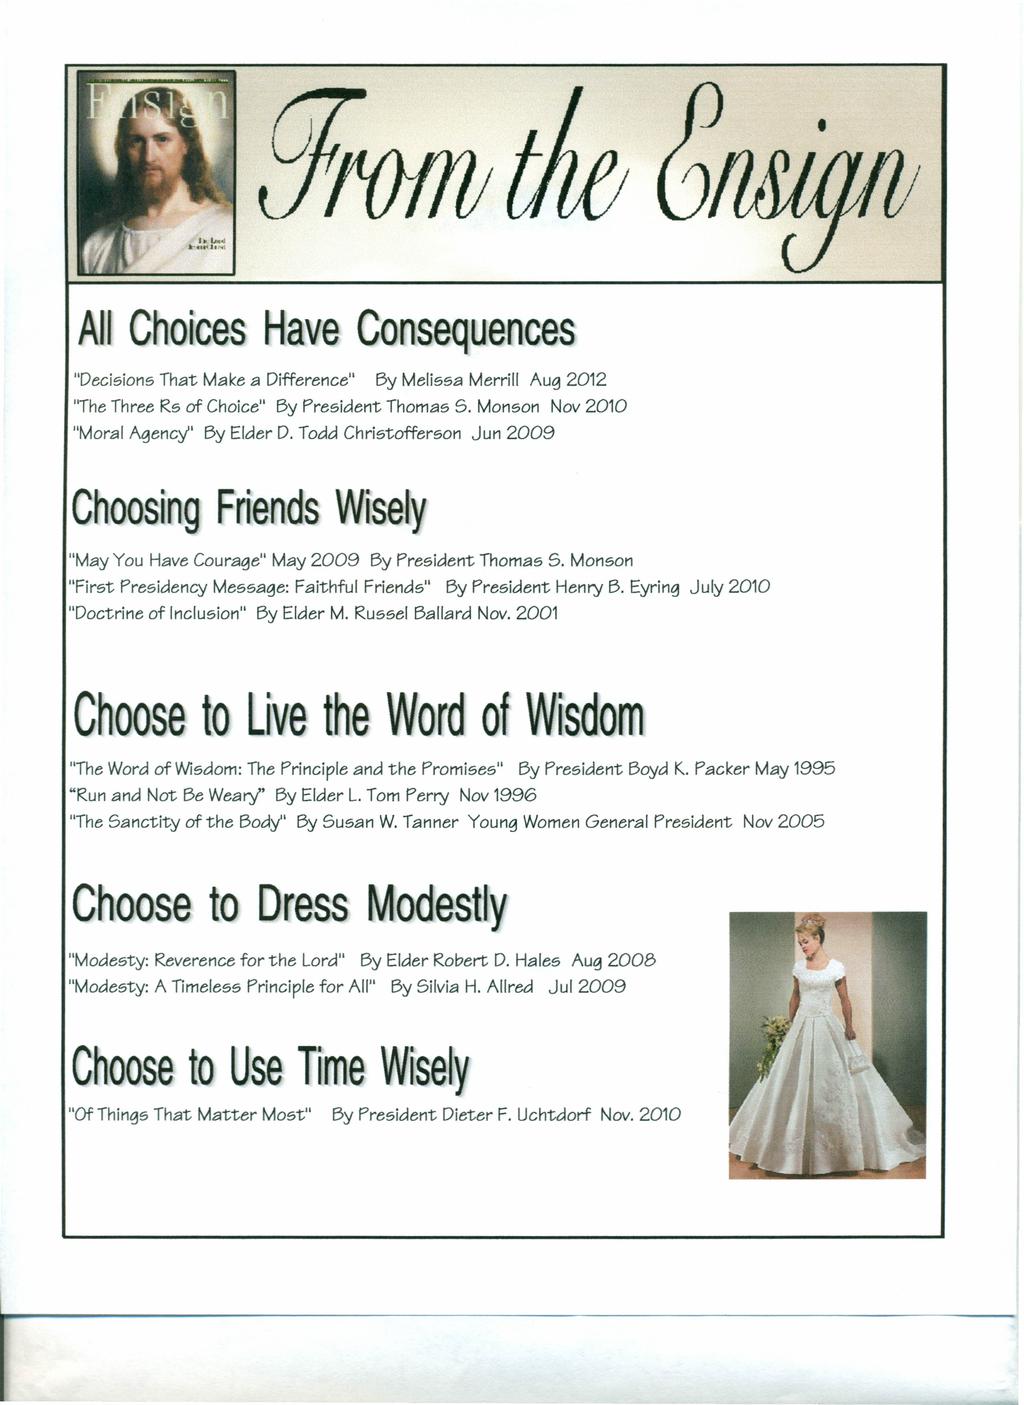 All Choices Have Consequences "Decisions That Make a Difference" By Melissa Merrill Aug 2012 "The Three Rs of Choice" By President Thomas S. Monson Nov 2010 "Moral Agency" By Elder D.